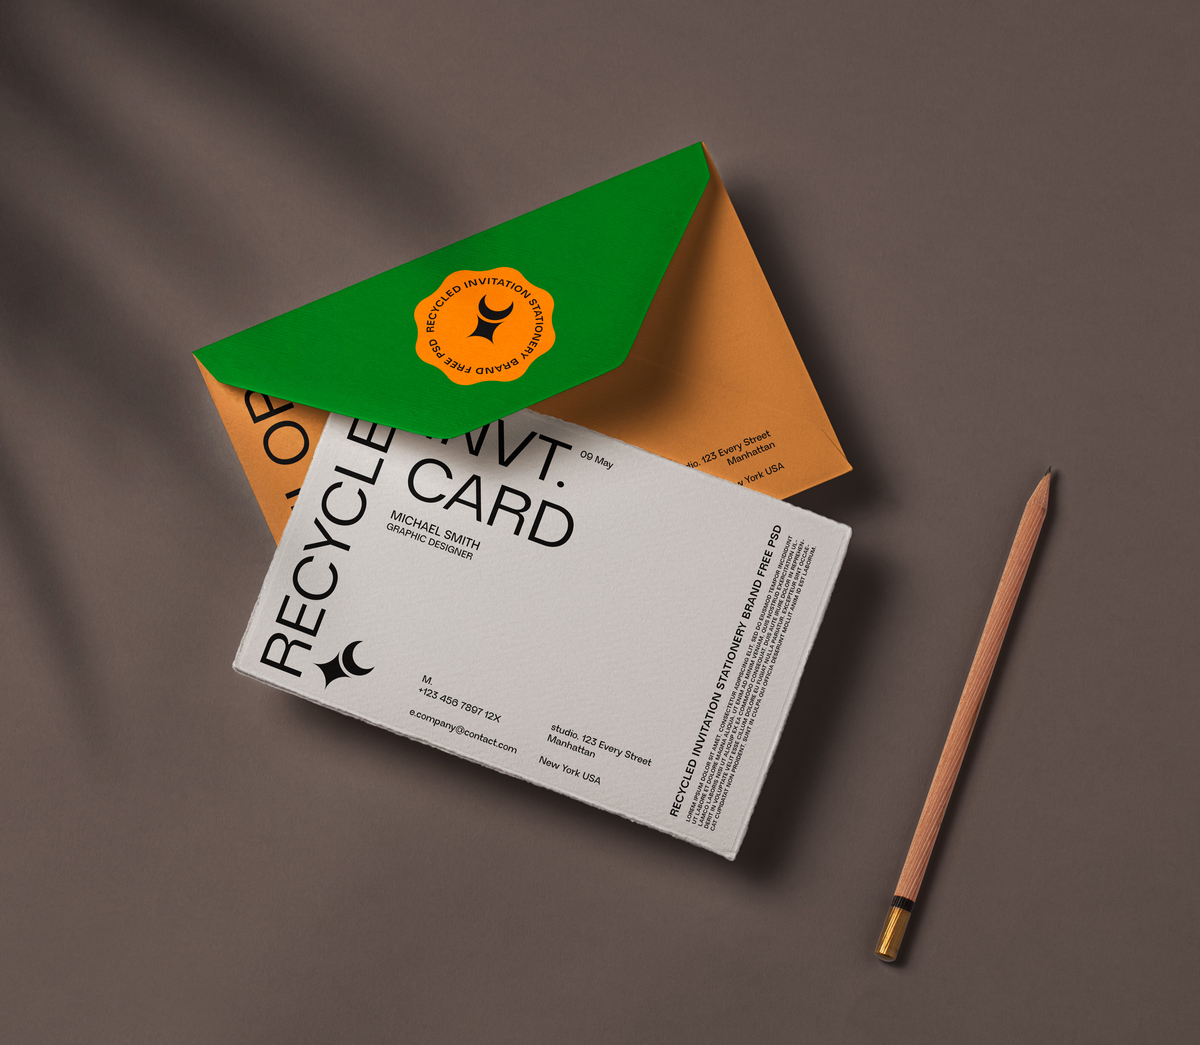 Recycled Branding Psd Invitation Card Mockup | Pixeden Club